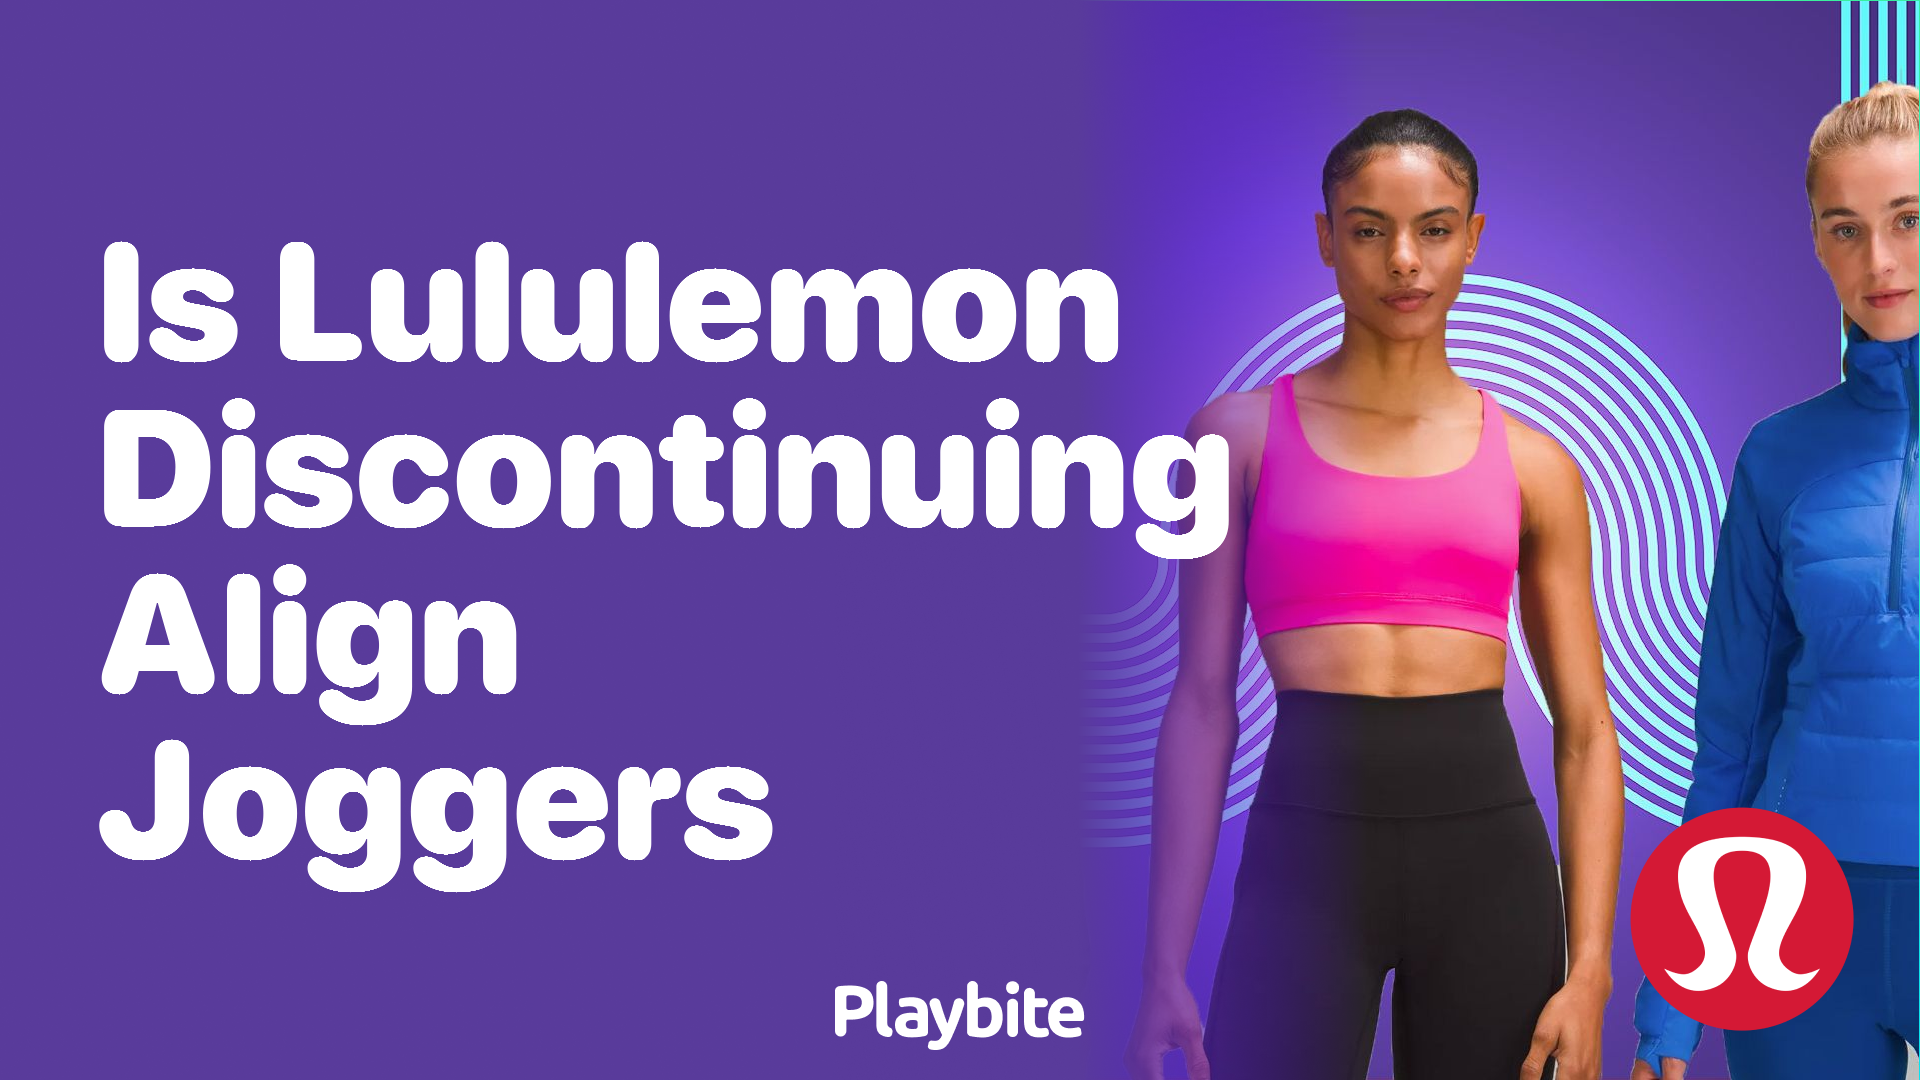 Is Lululemon Discontinuing Align Joggers? - Playbite